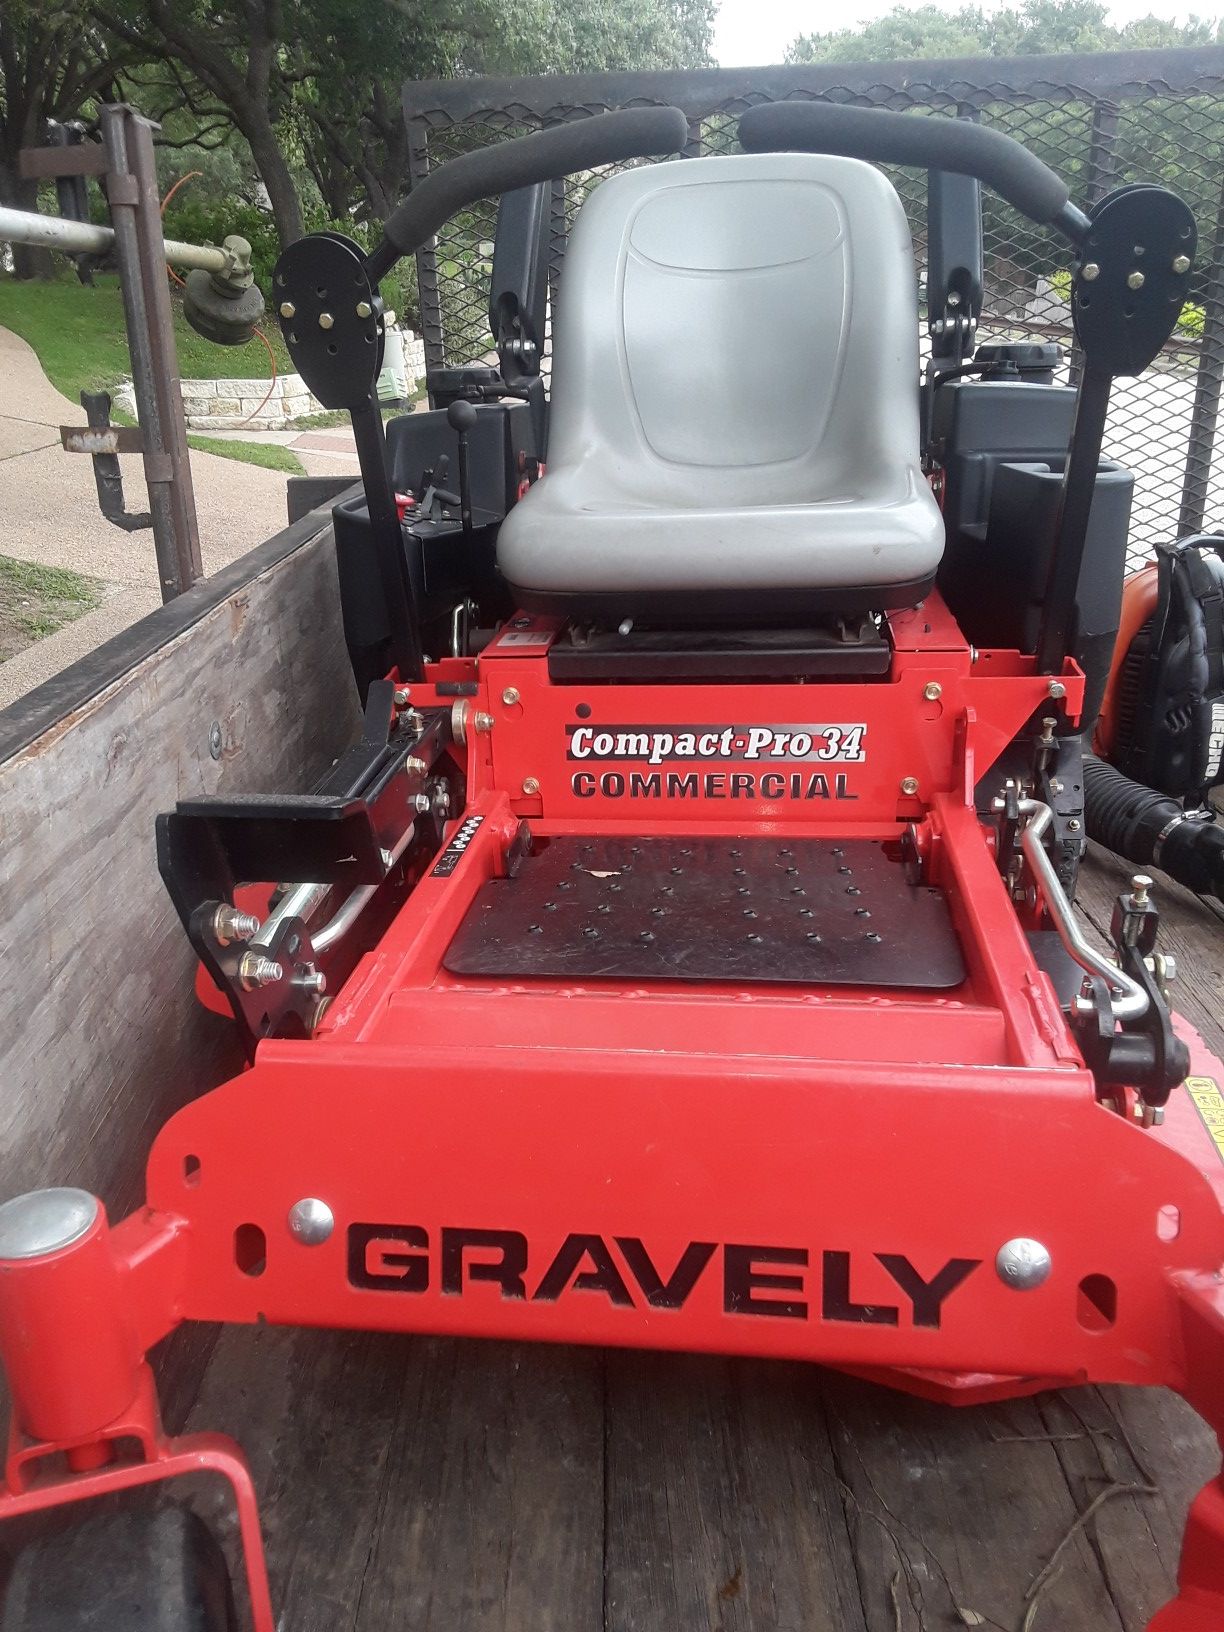 Tractor comercial gravely